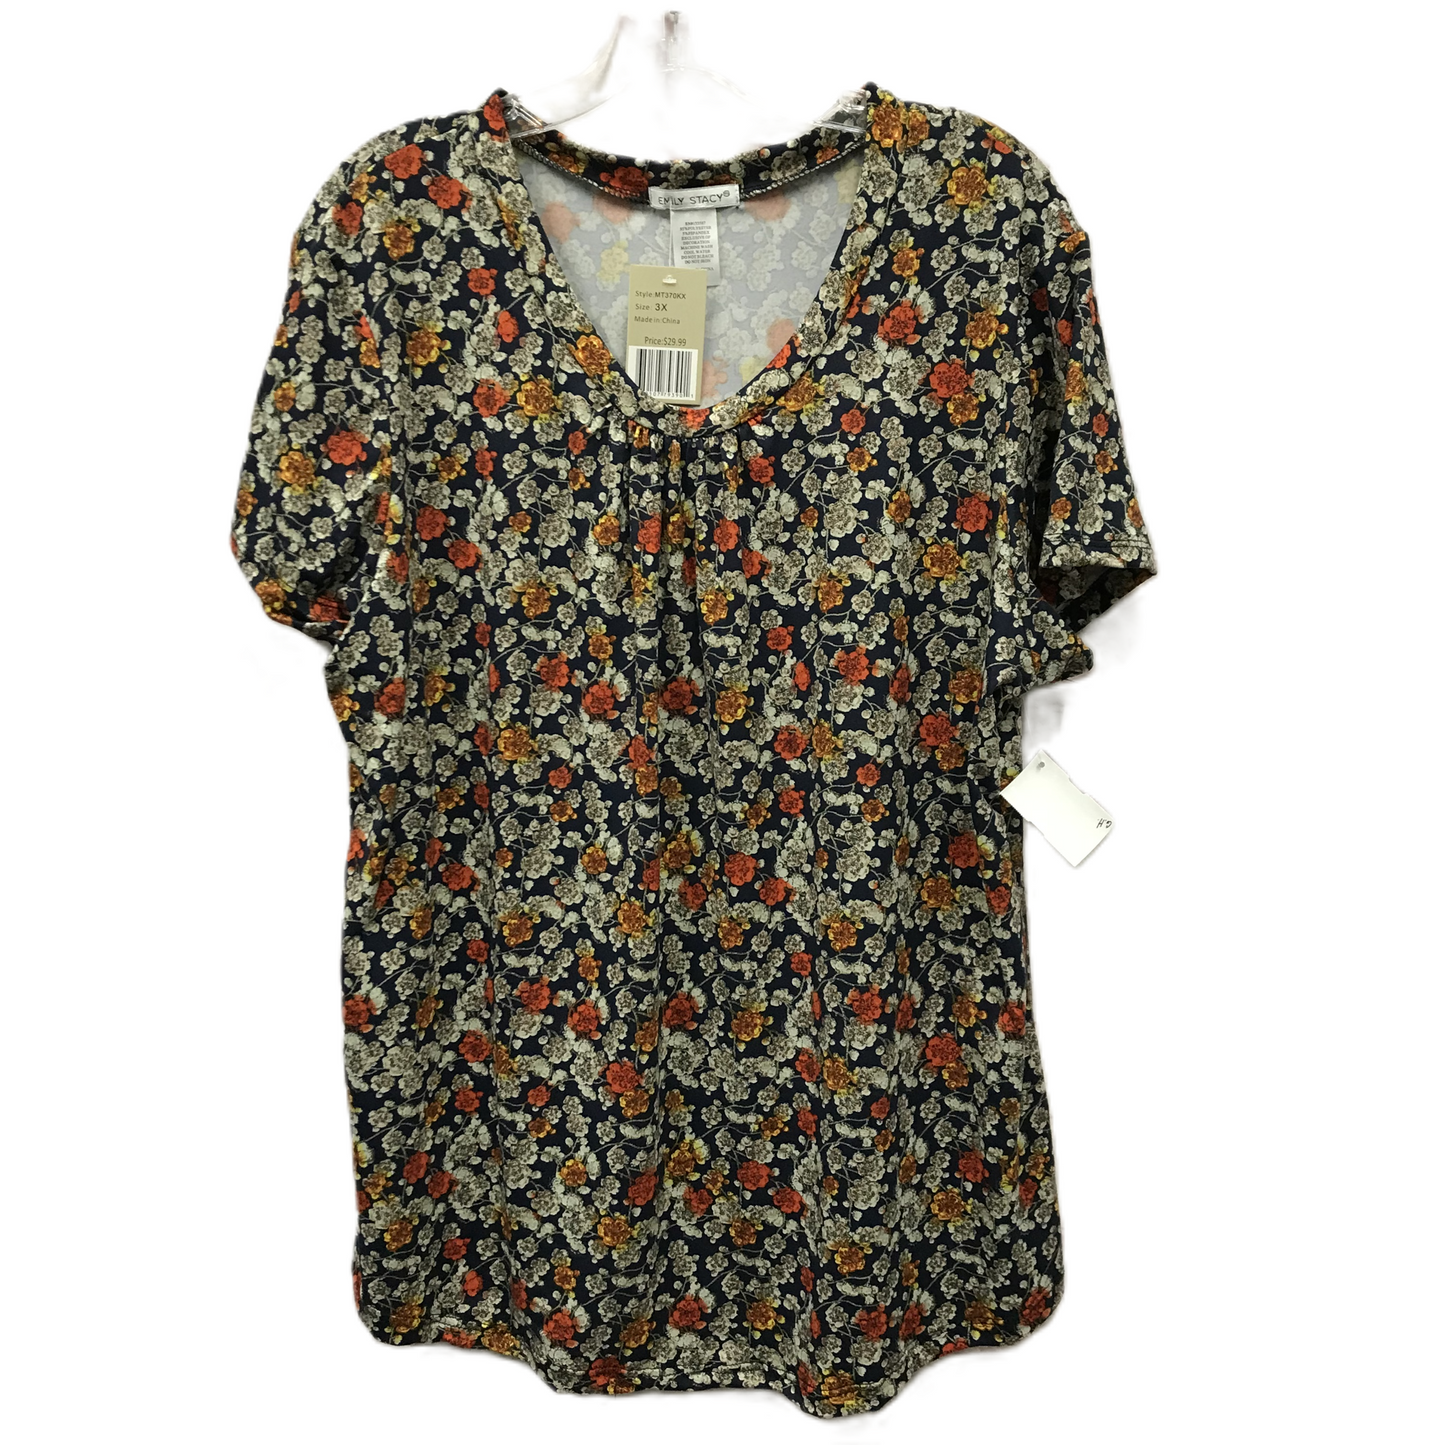 Floral Print Top Short Sleeve By emily stacy, Size: 3x